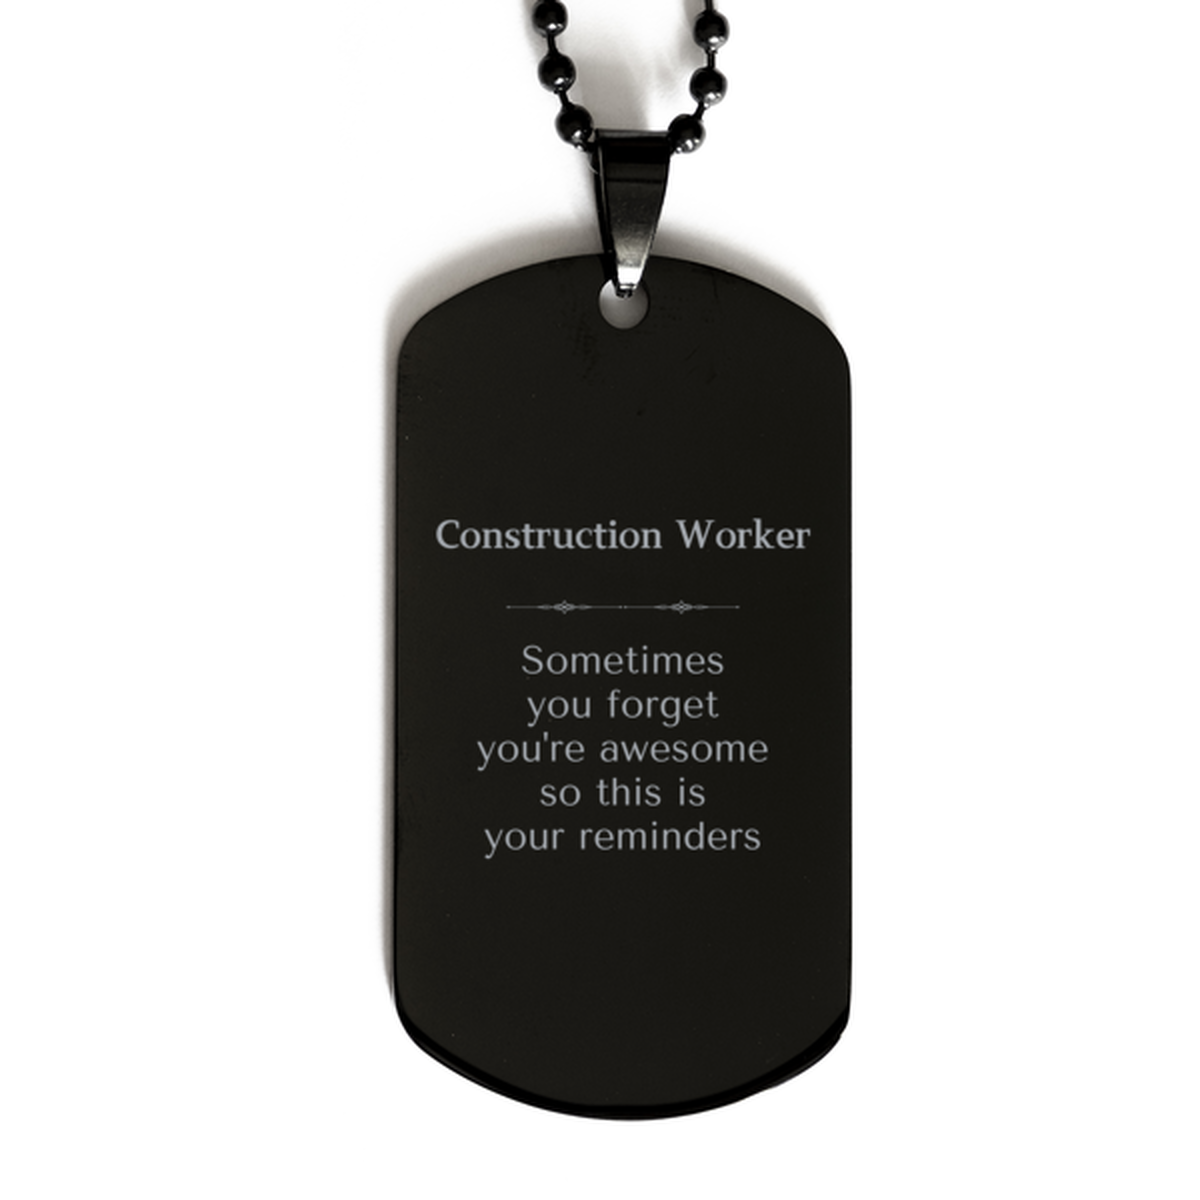 Sentimental Construction Worker Black Dog Tag, Construction Worker Sometimes you forget you're awesome so this is your reminders, Graduation Christmas Birthday Gifts for Construction Worker, Men, Women, Coworkers